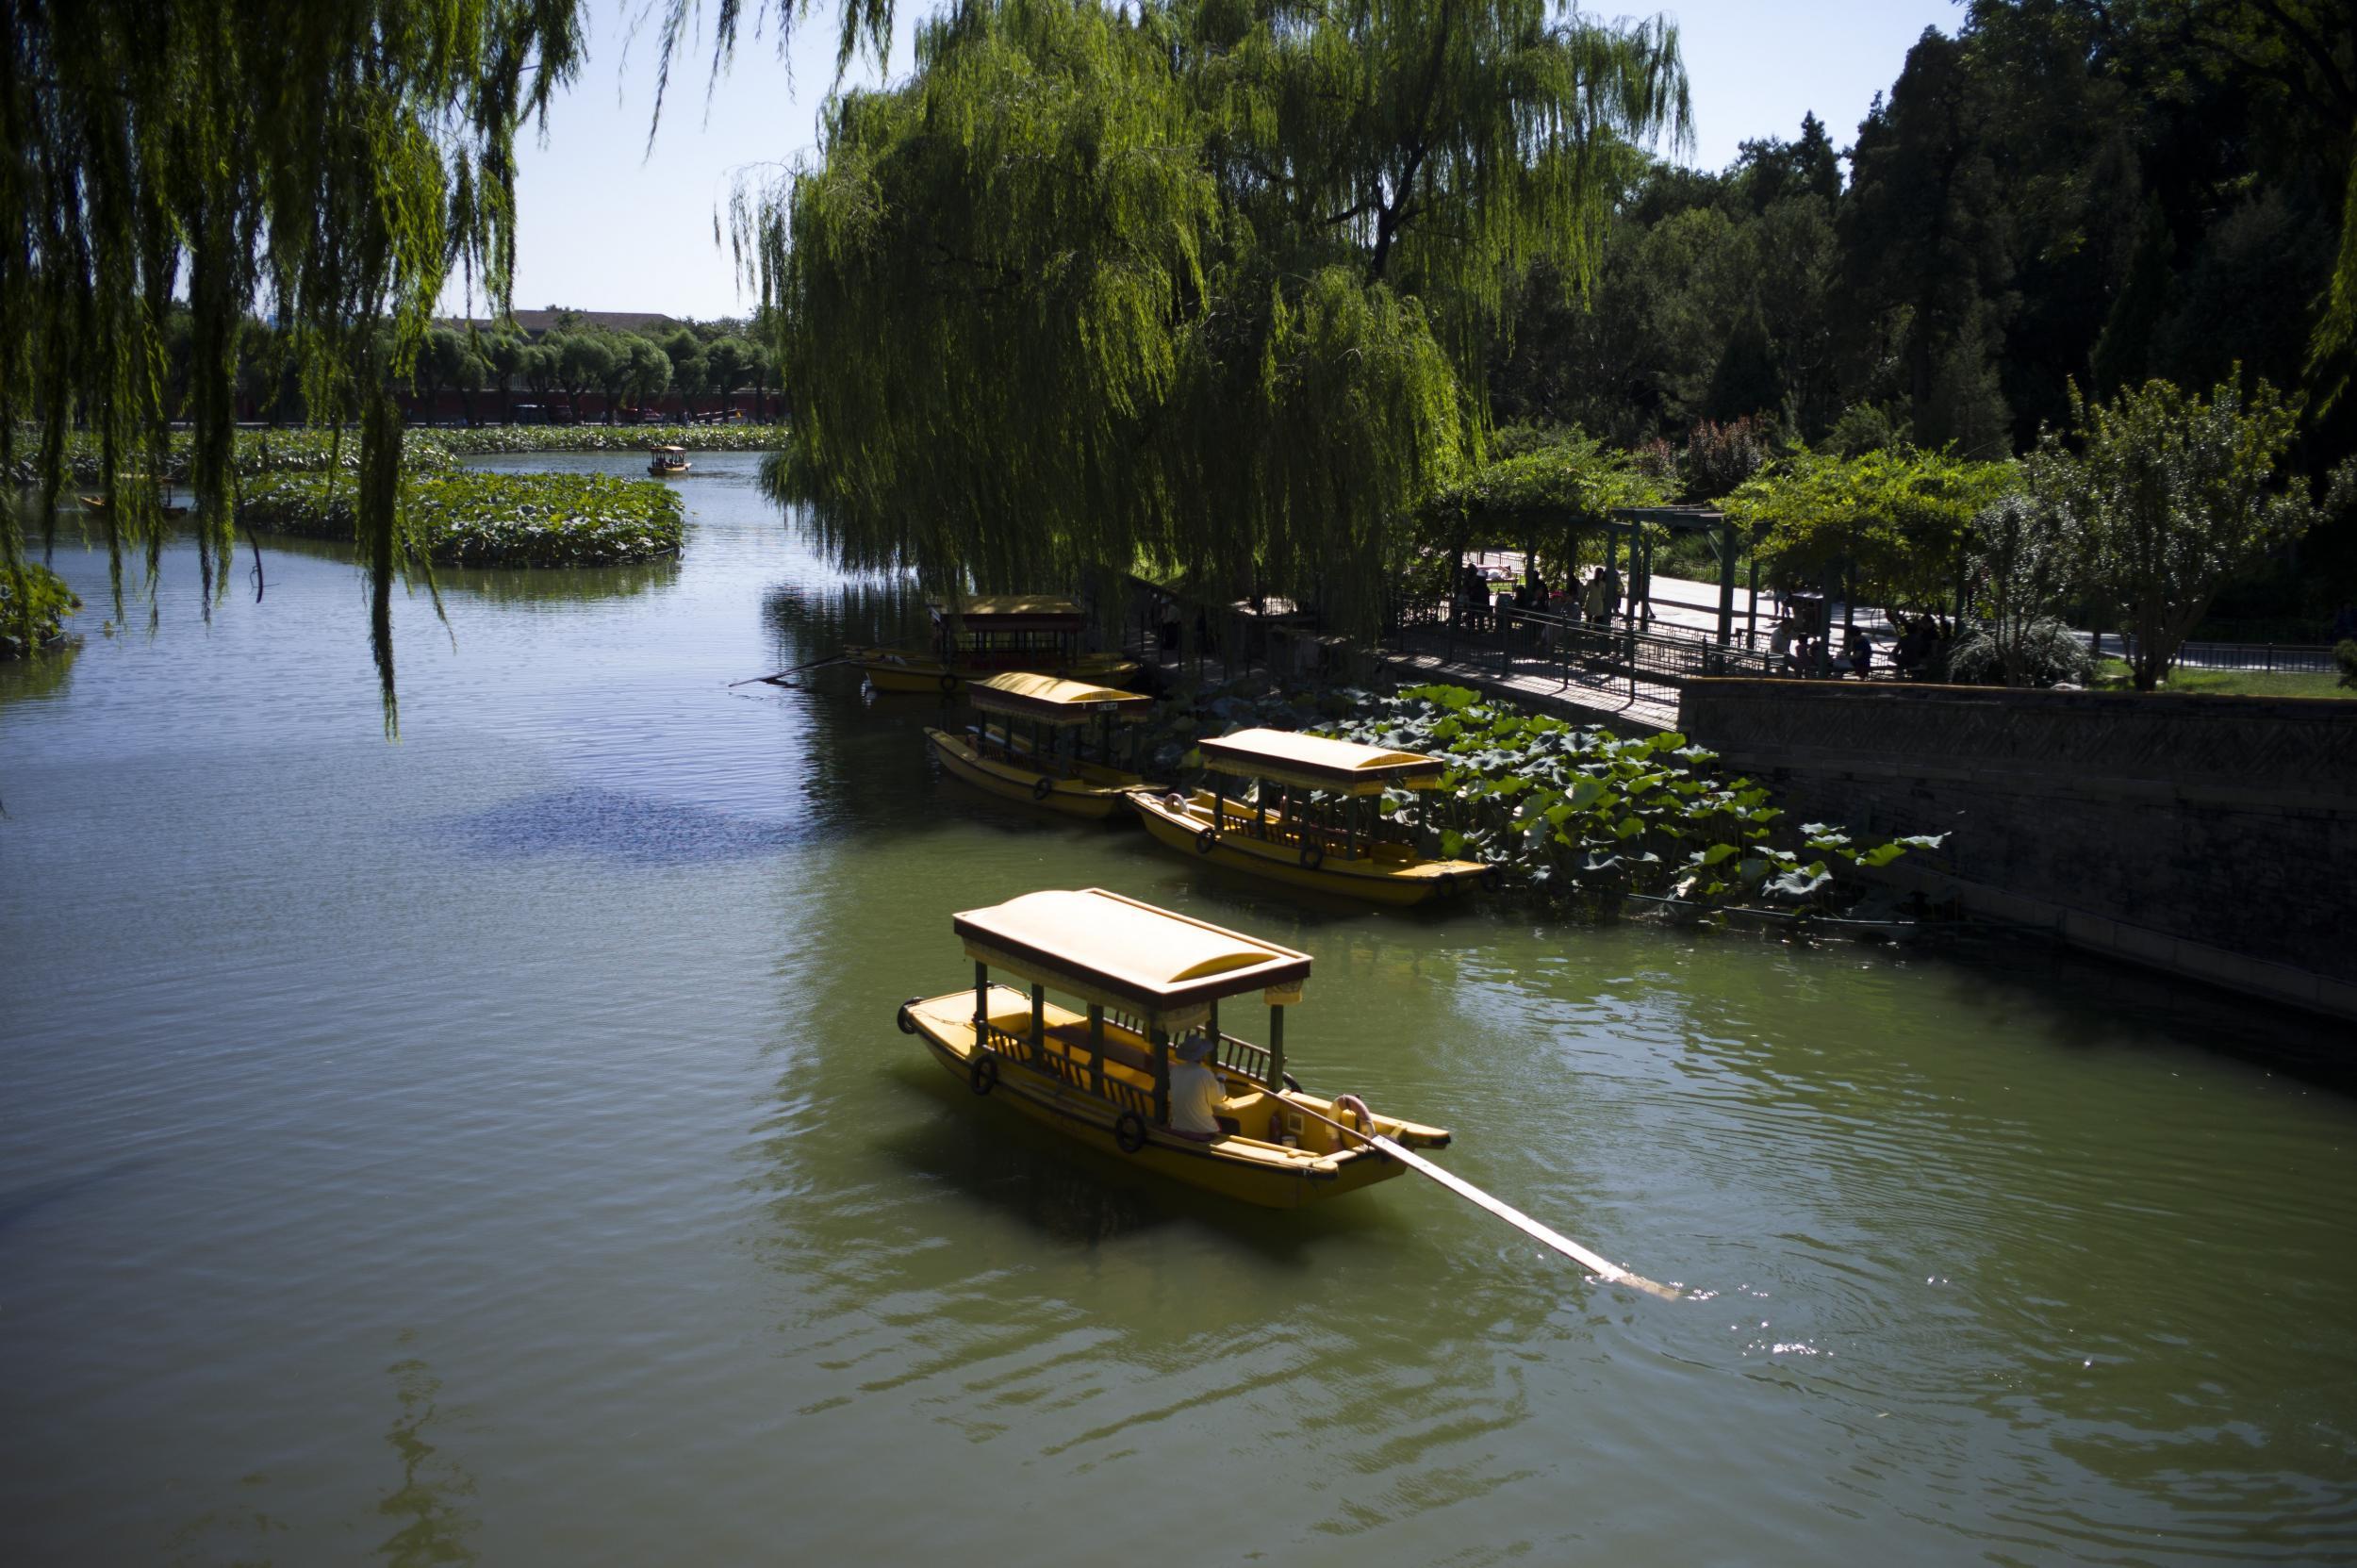 The imperial gardens of Beihai are good for a walk